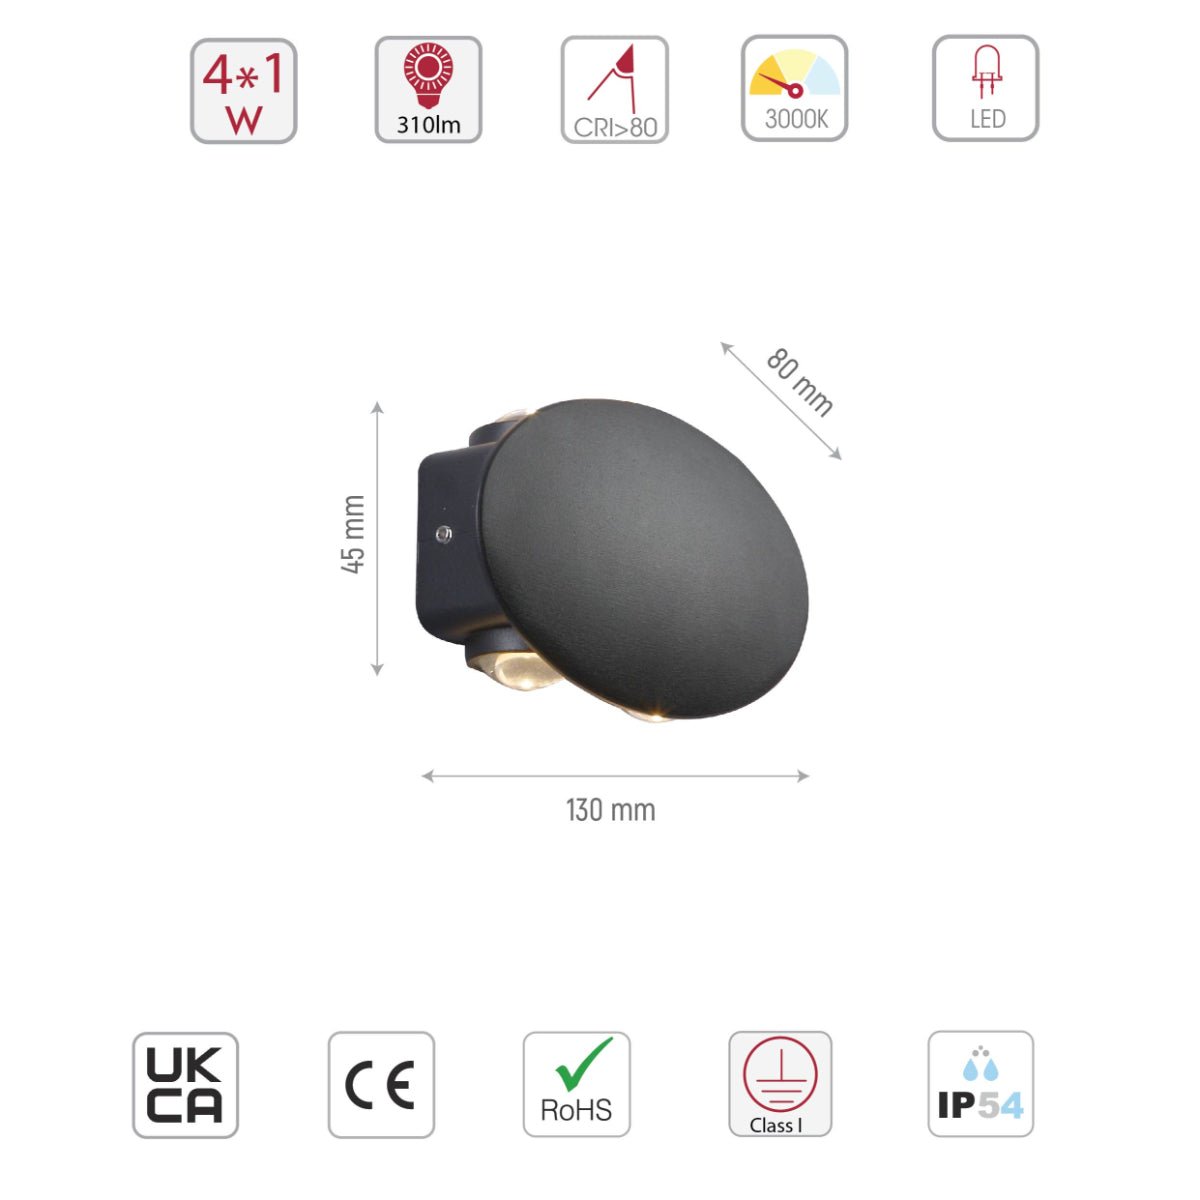 Size and specs of Black Ellipse Up Down Decorative Outdoor Modern LED Wall Light | TEKLED 182-03374